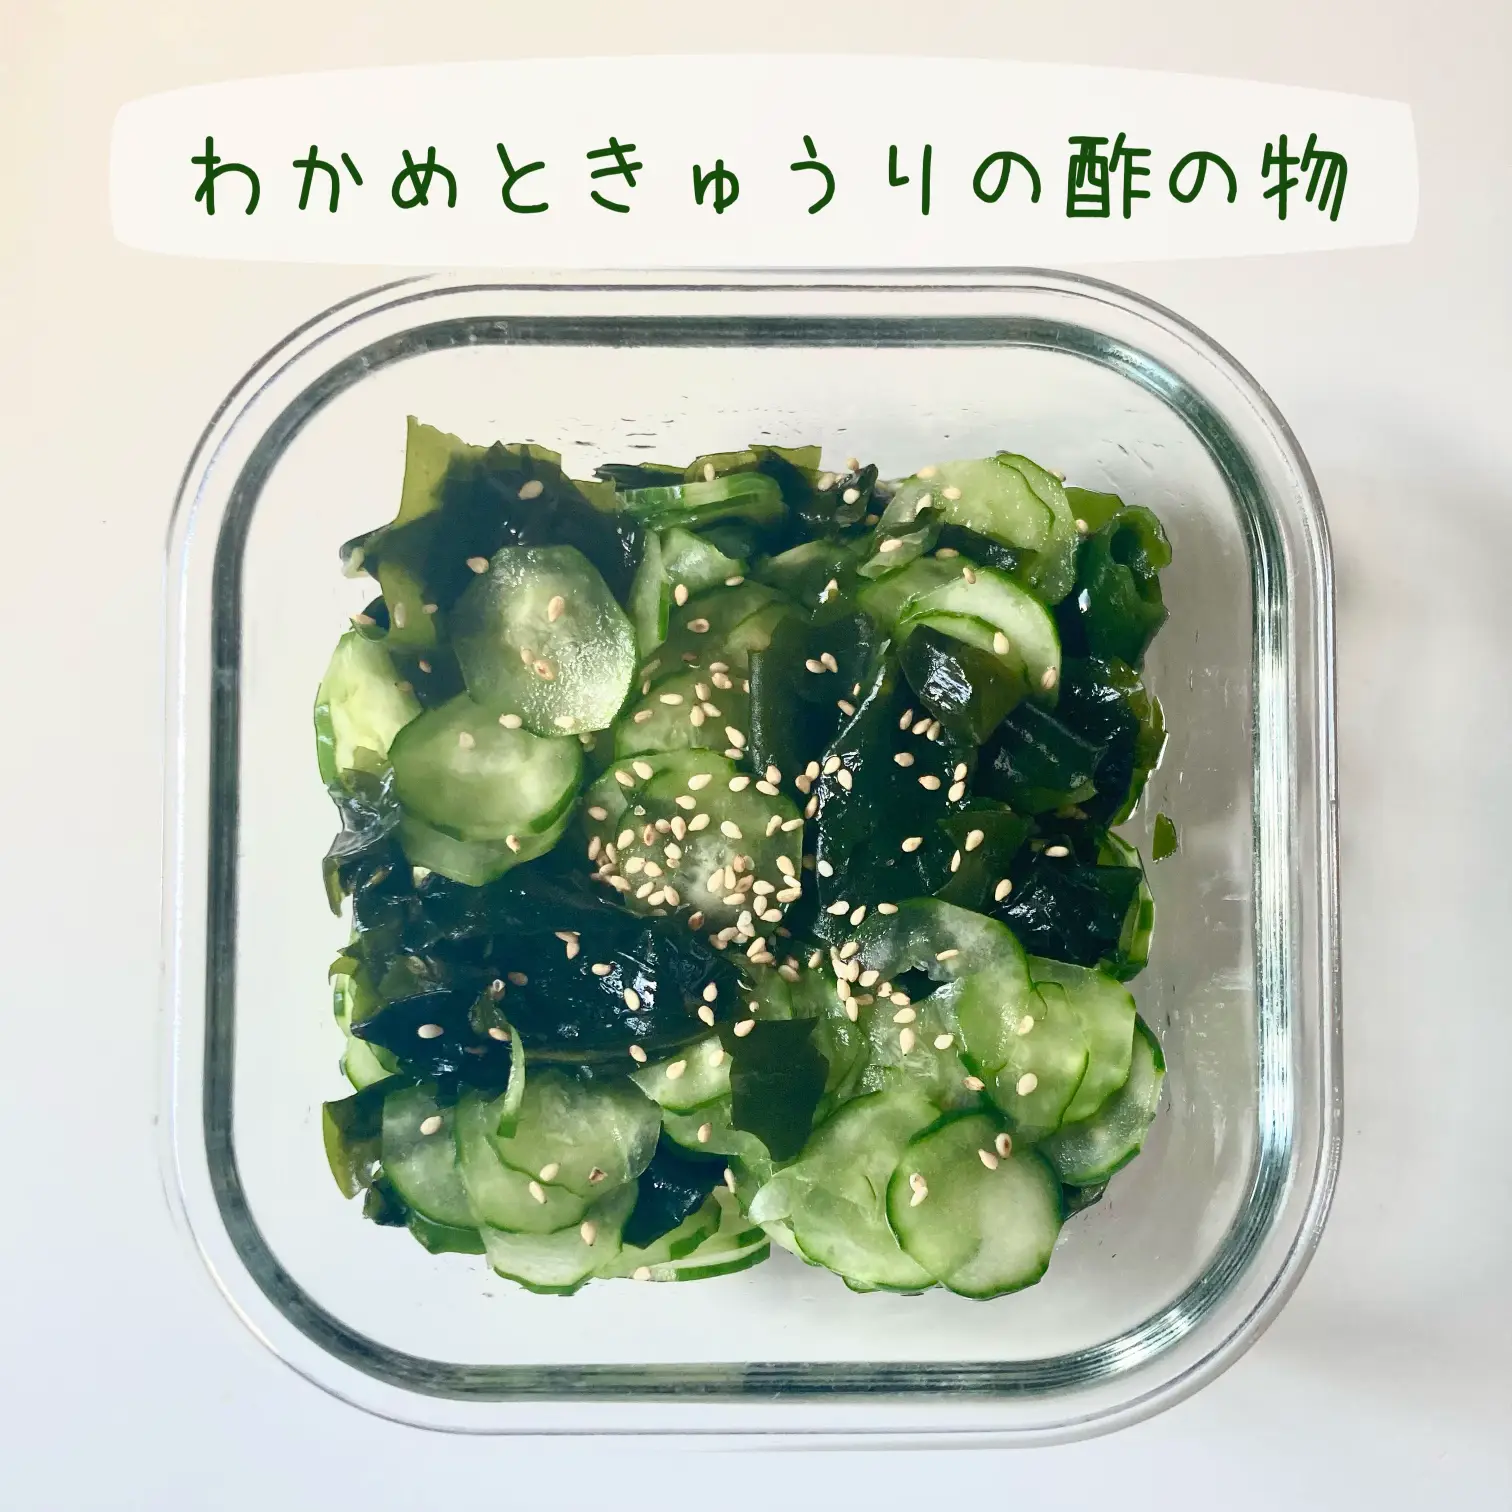 Recipe] Wakame seaweed and cucumber with vinegar🥒, Gallery posted by ゆうさん